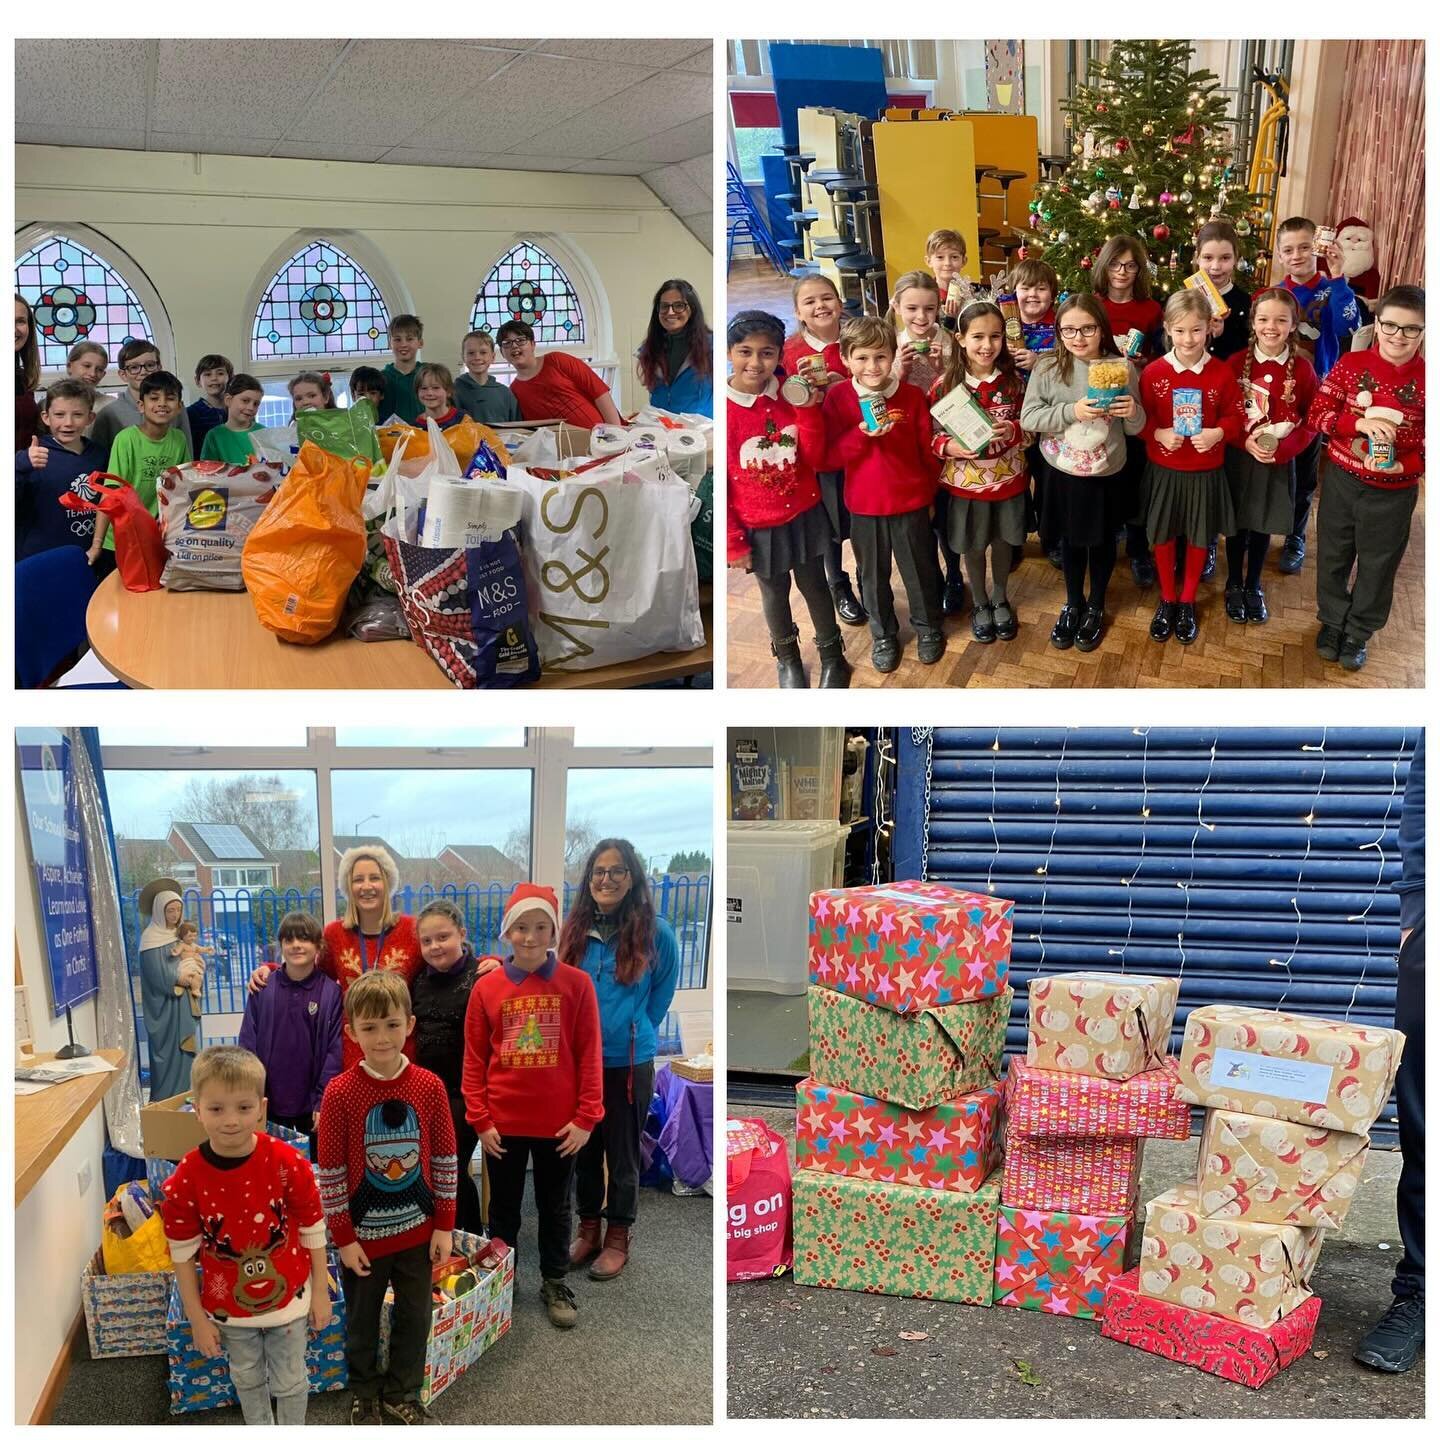 We hope you have all had a lovely half term this week! 

While Christmas seems like a distant memory, we wanted to take the time to thank all the schools and nurseries who donated to us last year through our Reverse Advent Calendar Appeal.

Your supp